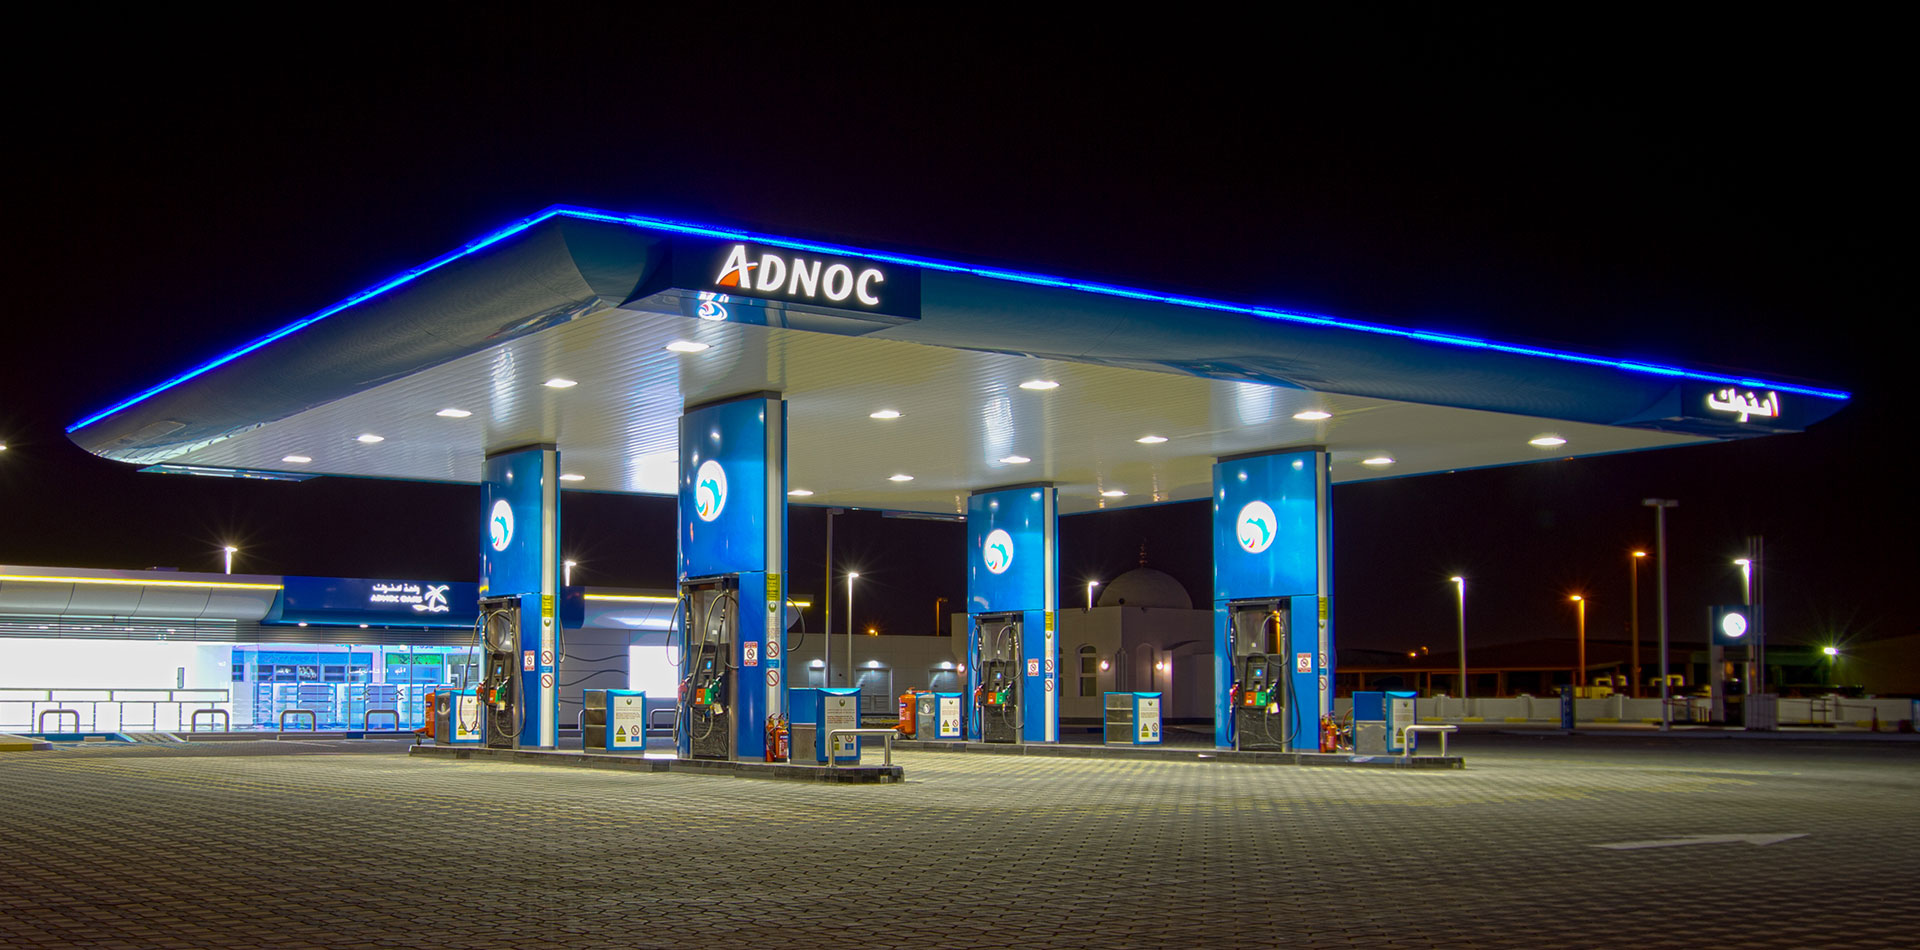 ADNOC petrol station with Blade Signage